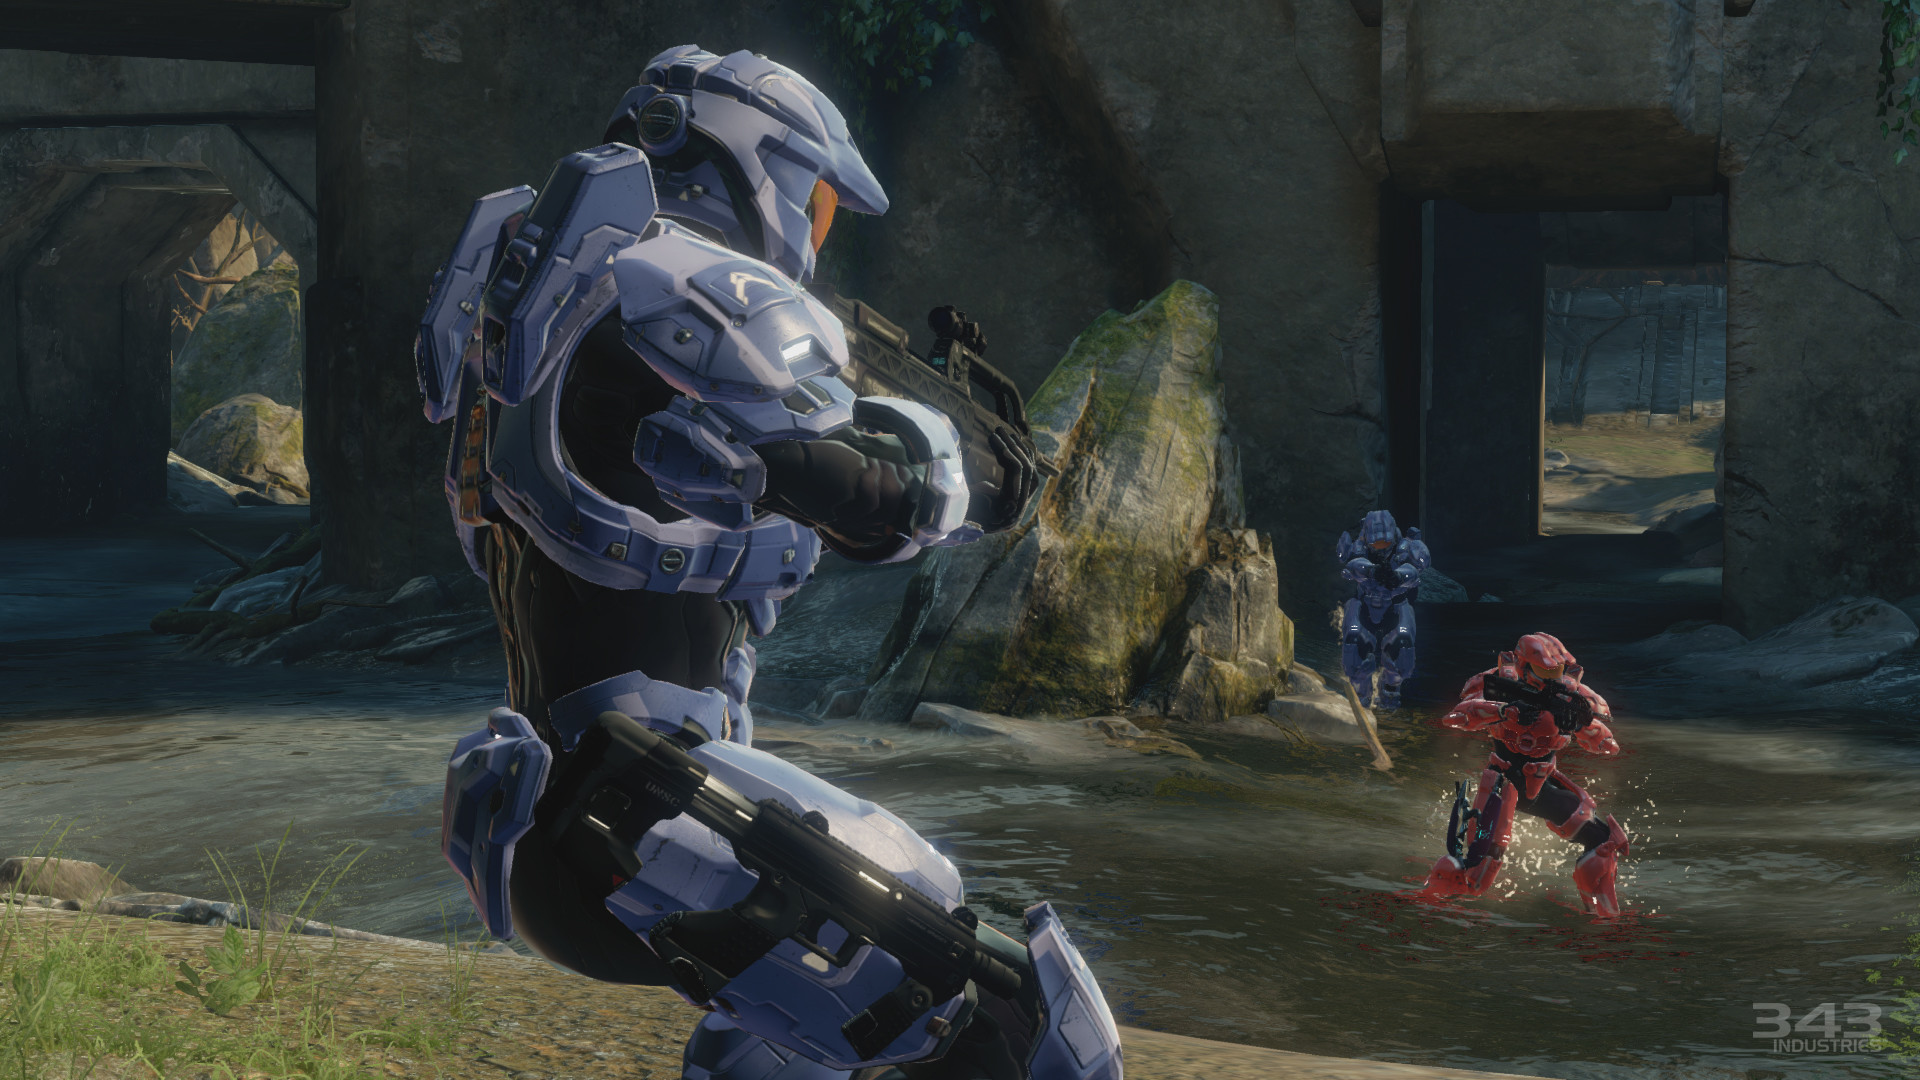 1920x1080 I have no idea why pretty much the only images for H2A are Spartan  hindquarters.